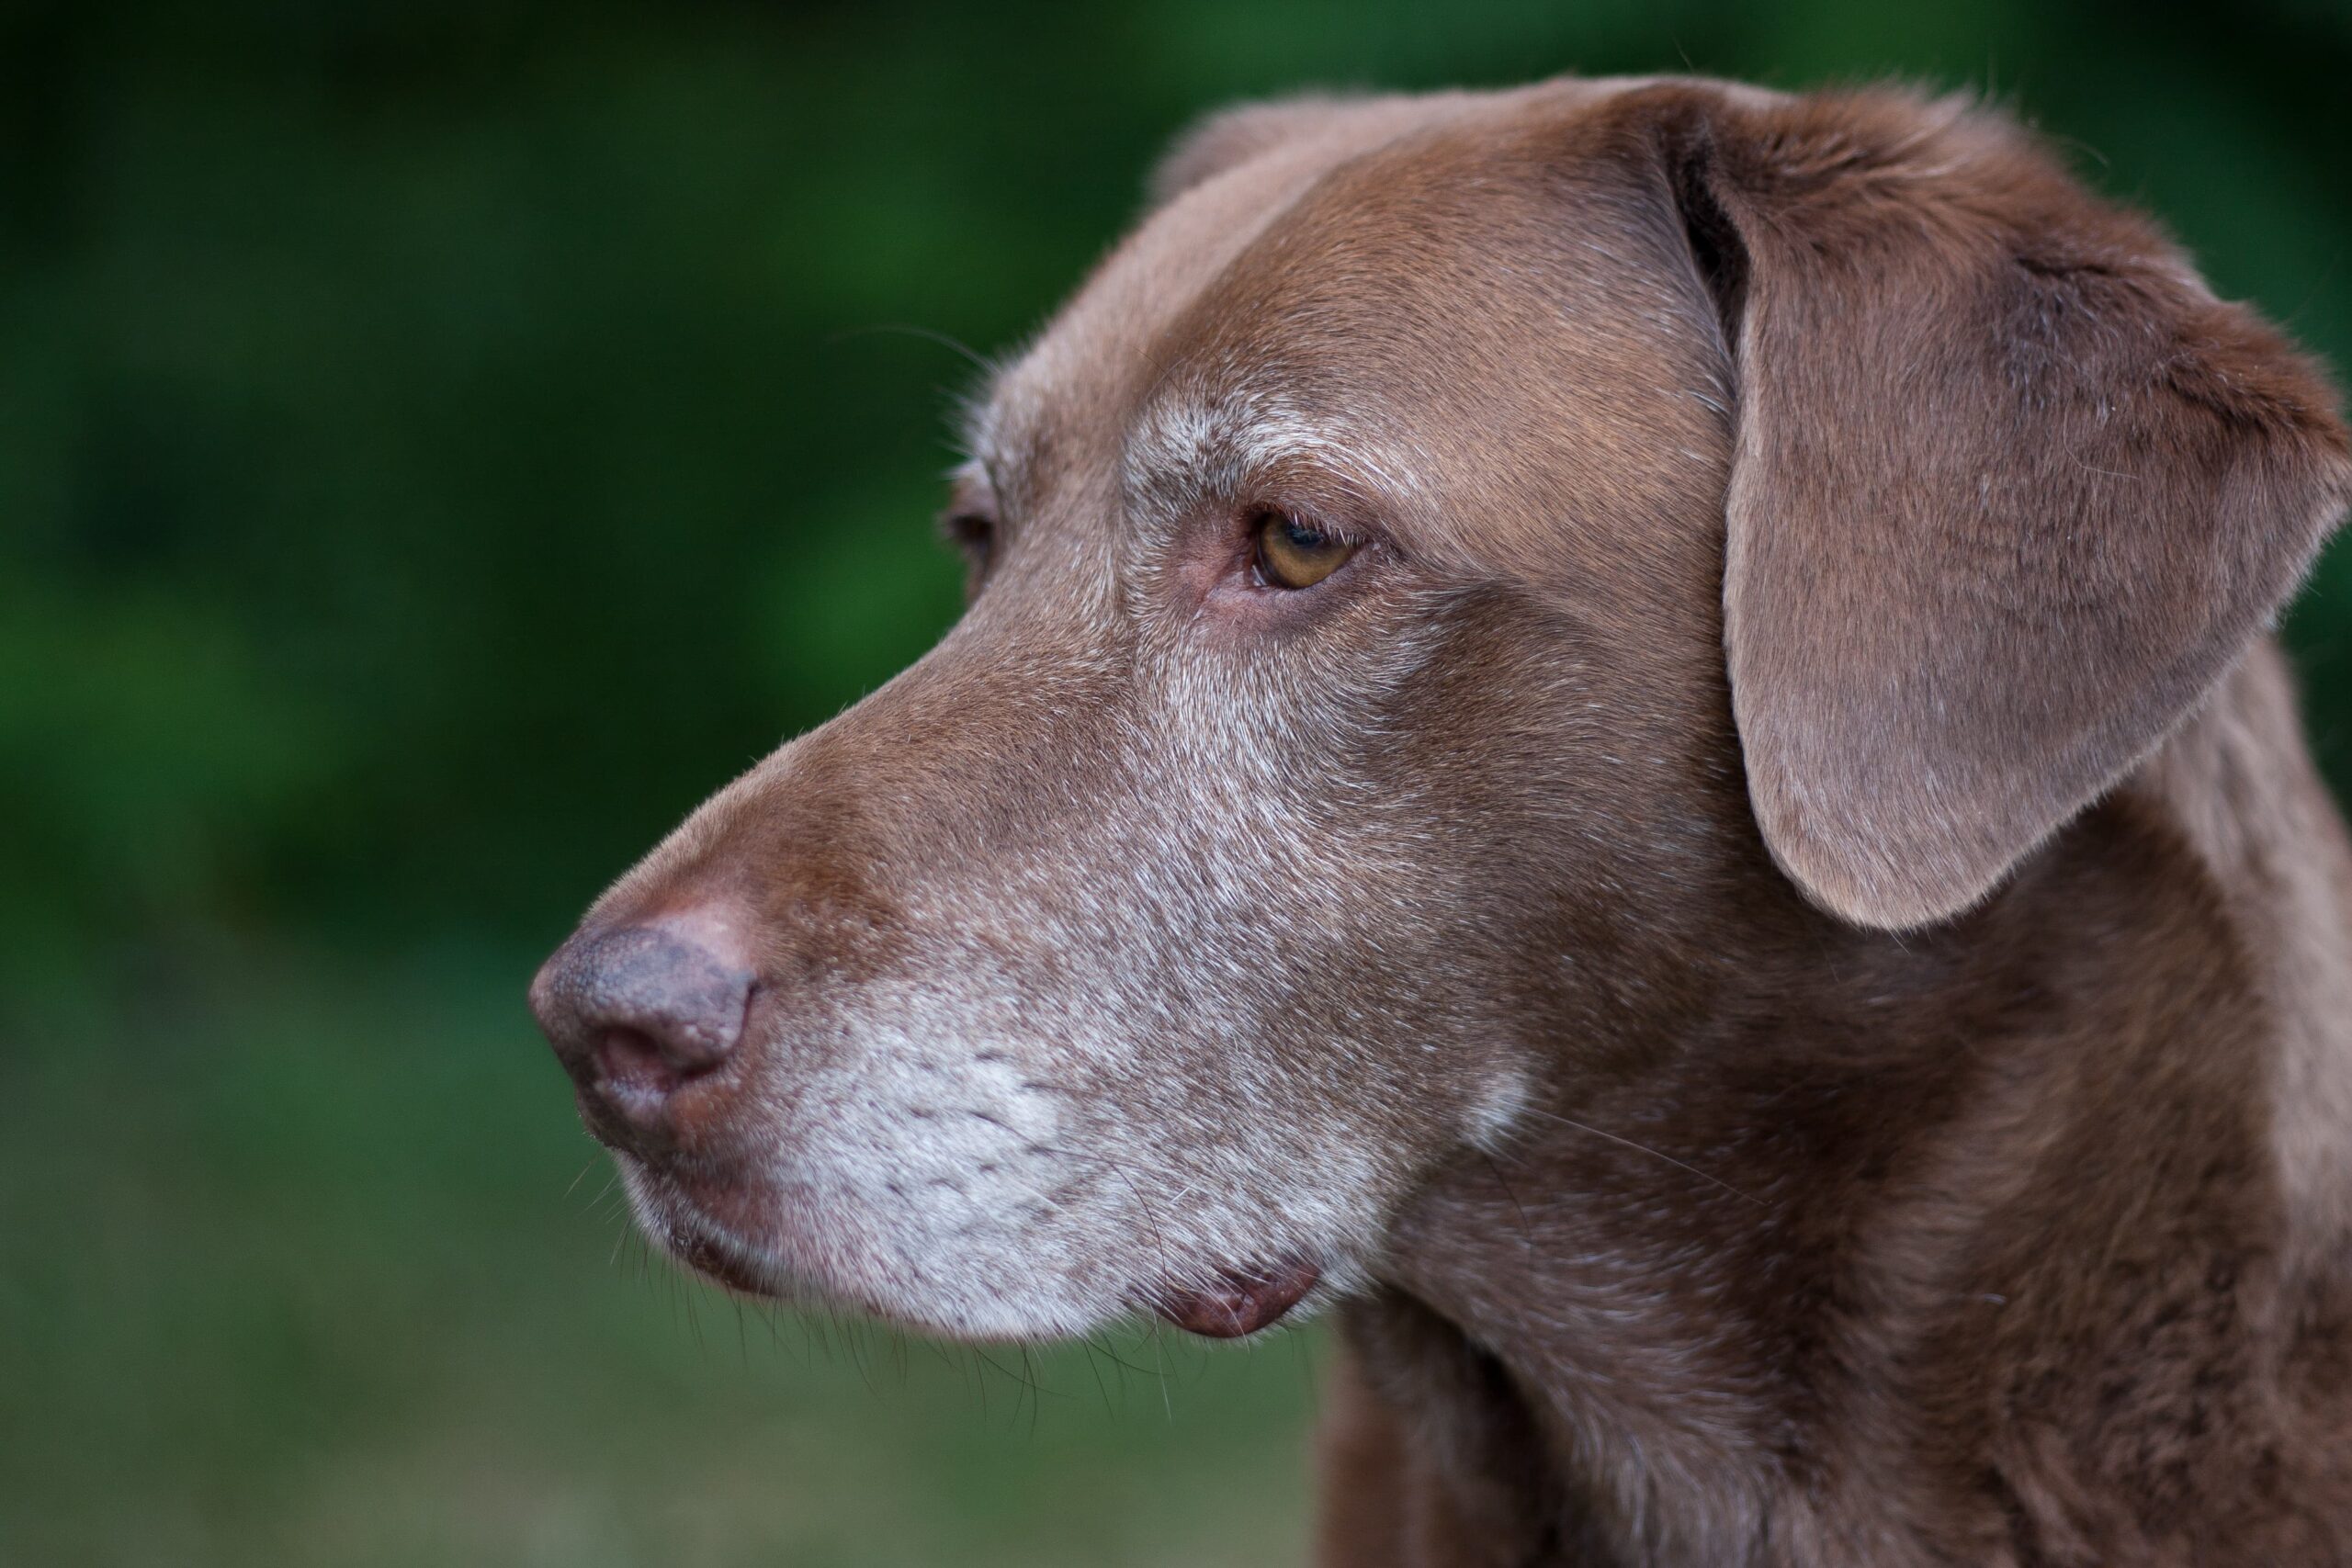 Caring for Senior Dogs: What You Need to Know